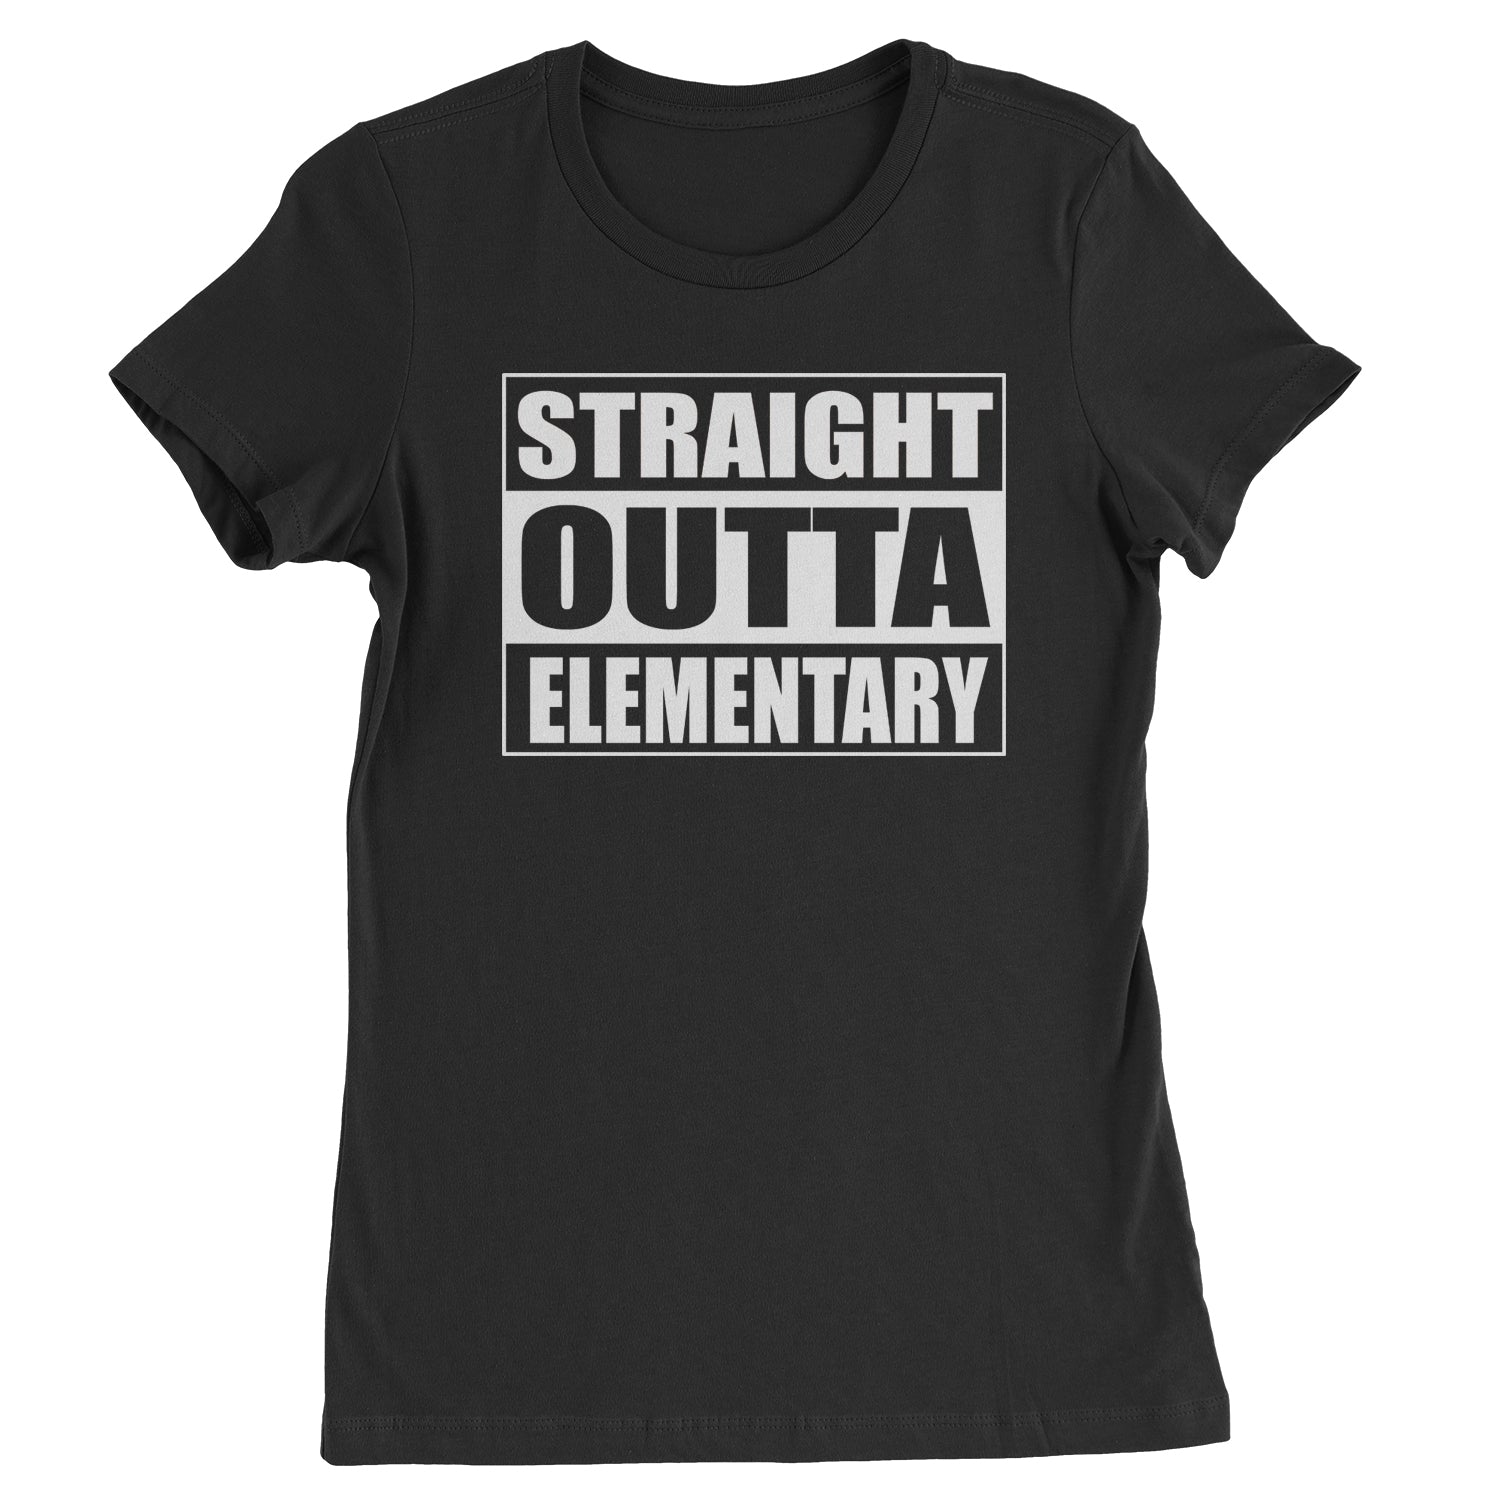 Straight Outta Elementary Womens T-shirt 2020, 2021, 2022, class, of, quarantine, queen by Expression Tees